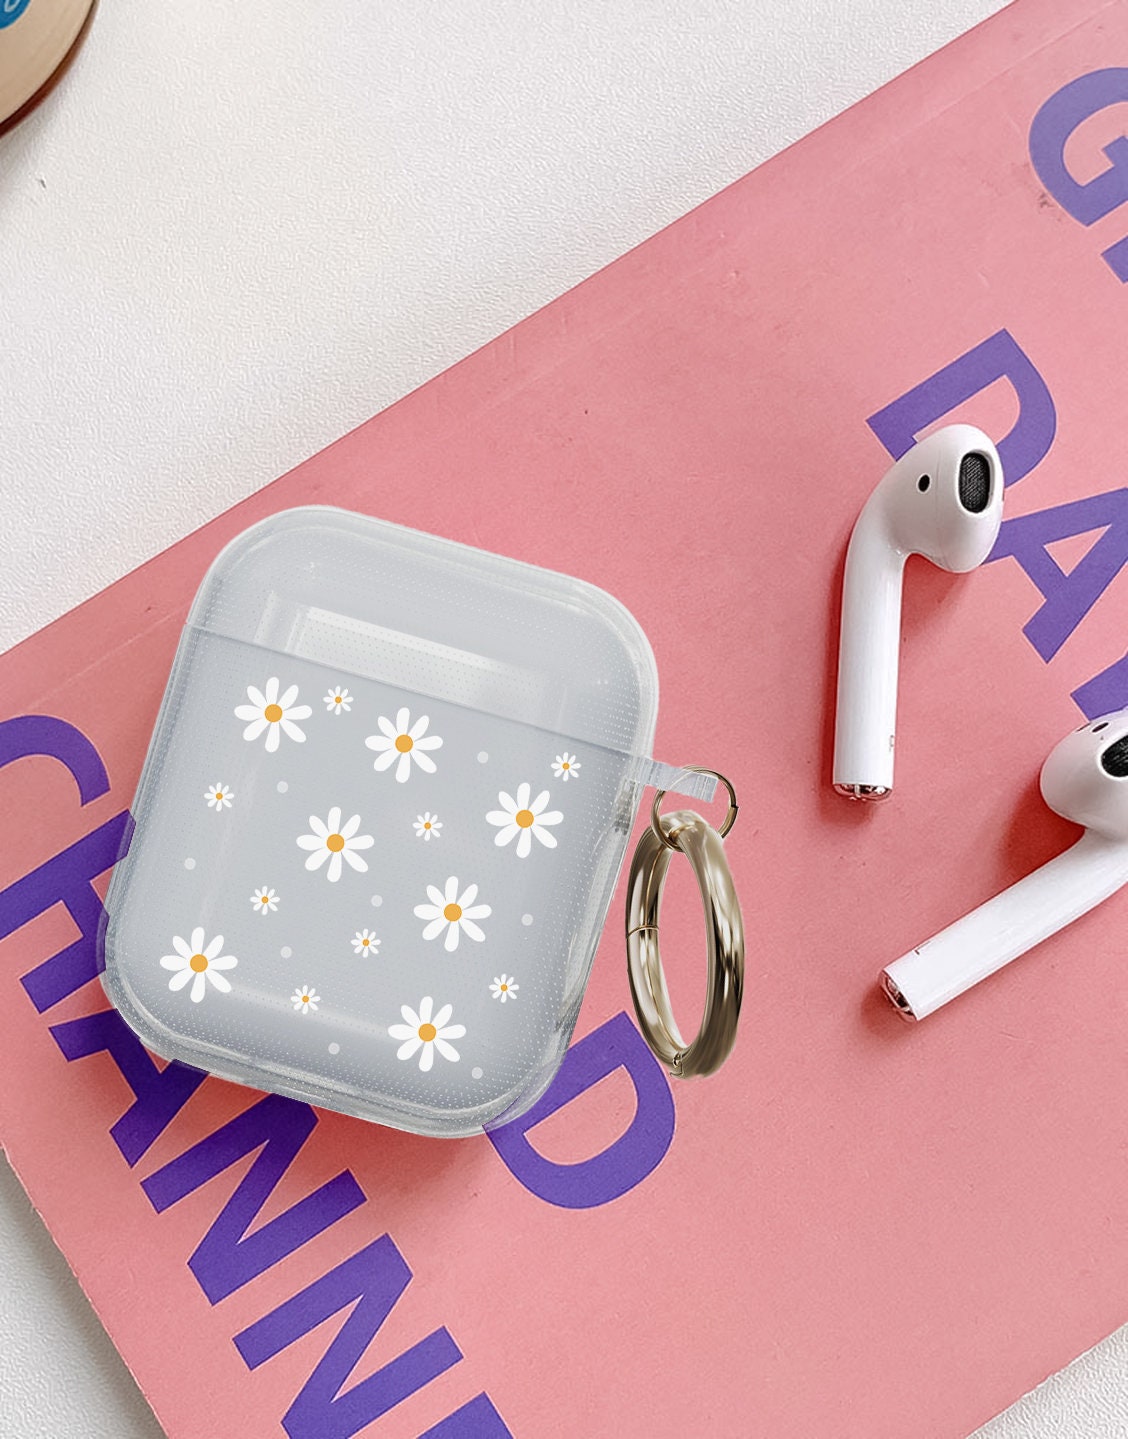 Cute Daisy Flower Case for Airpods 1&2 with Keychain, MAYCARI Floral Design  Cute Protective Soft TPU…See more Cute Daisy Flower Case for Airpods 1&2